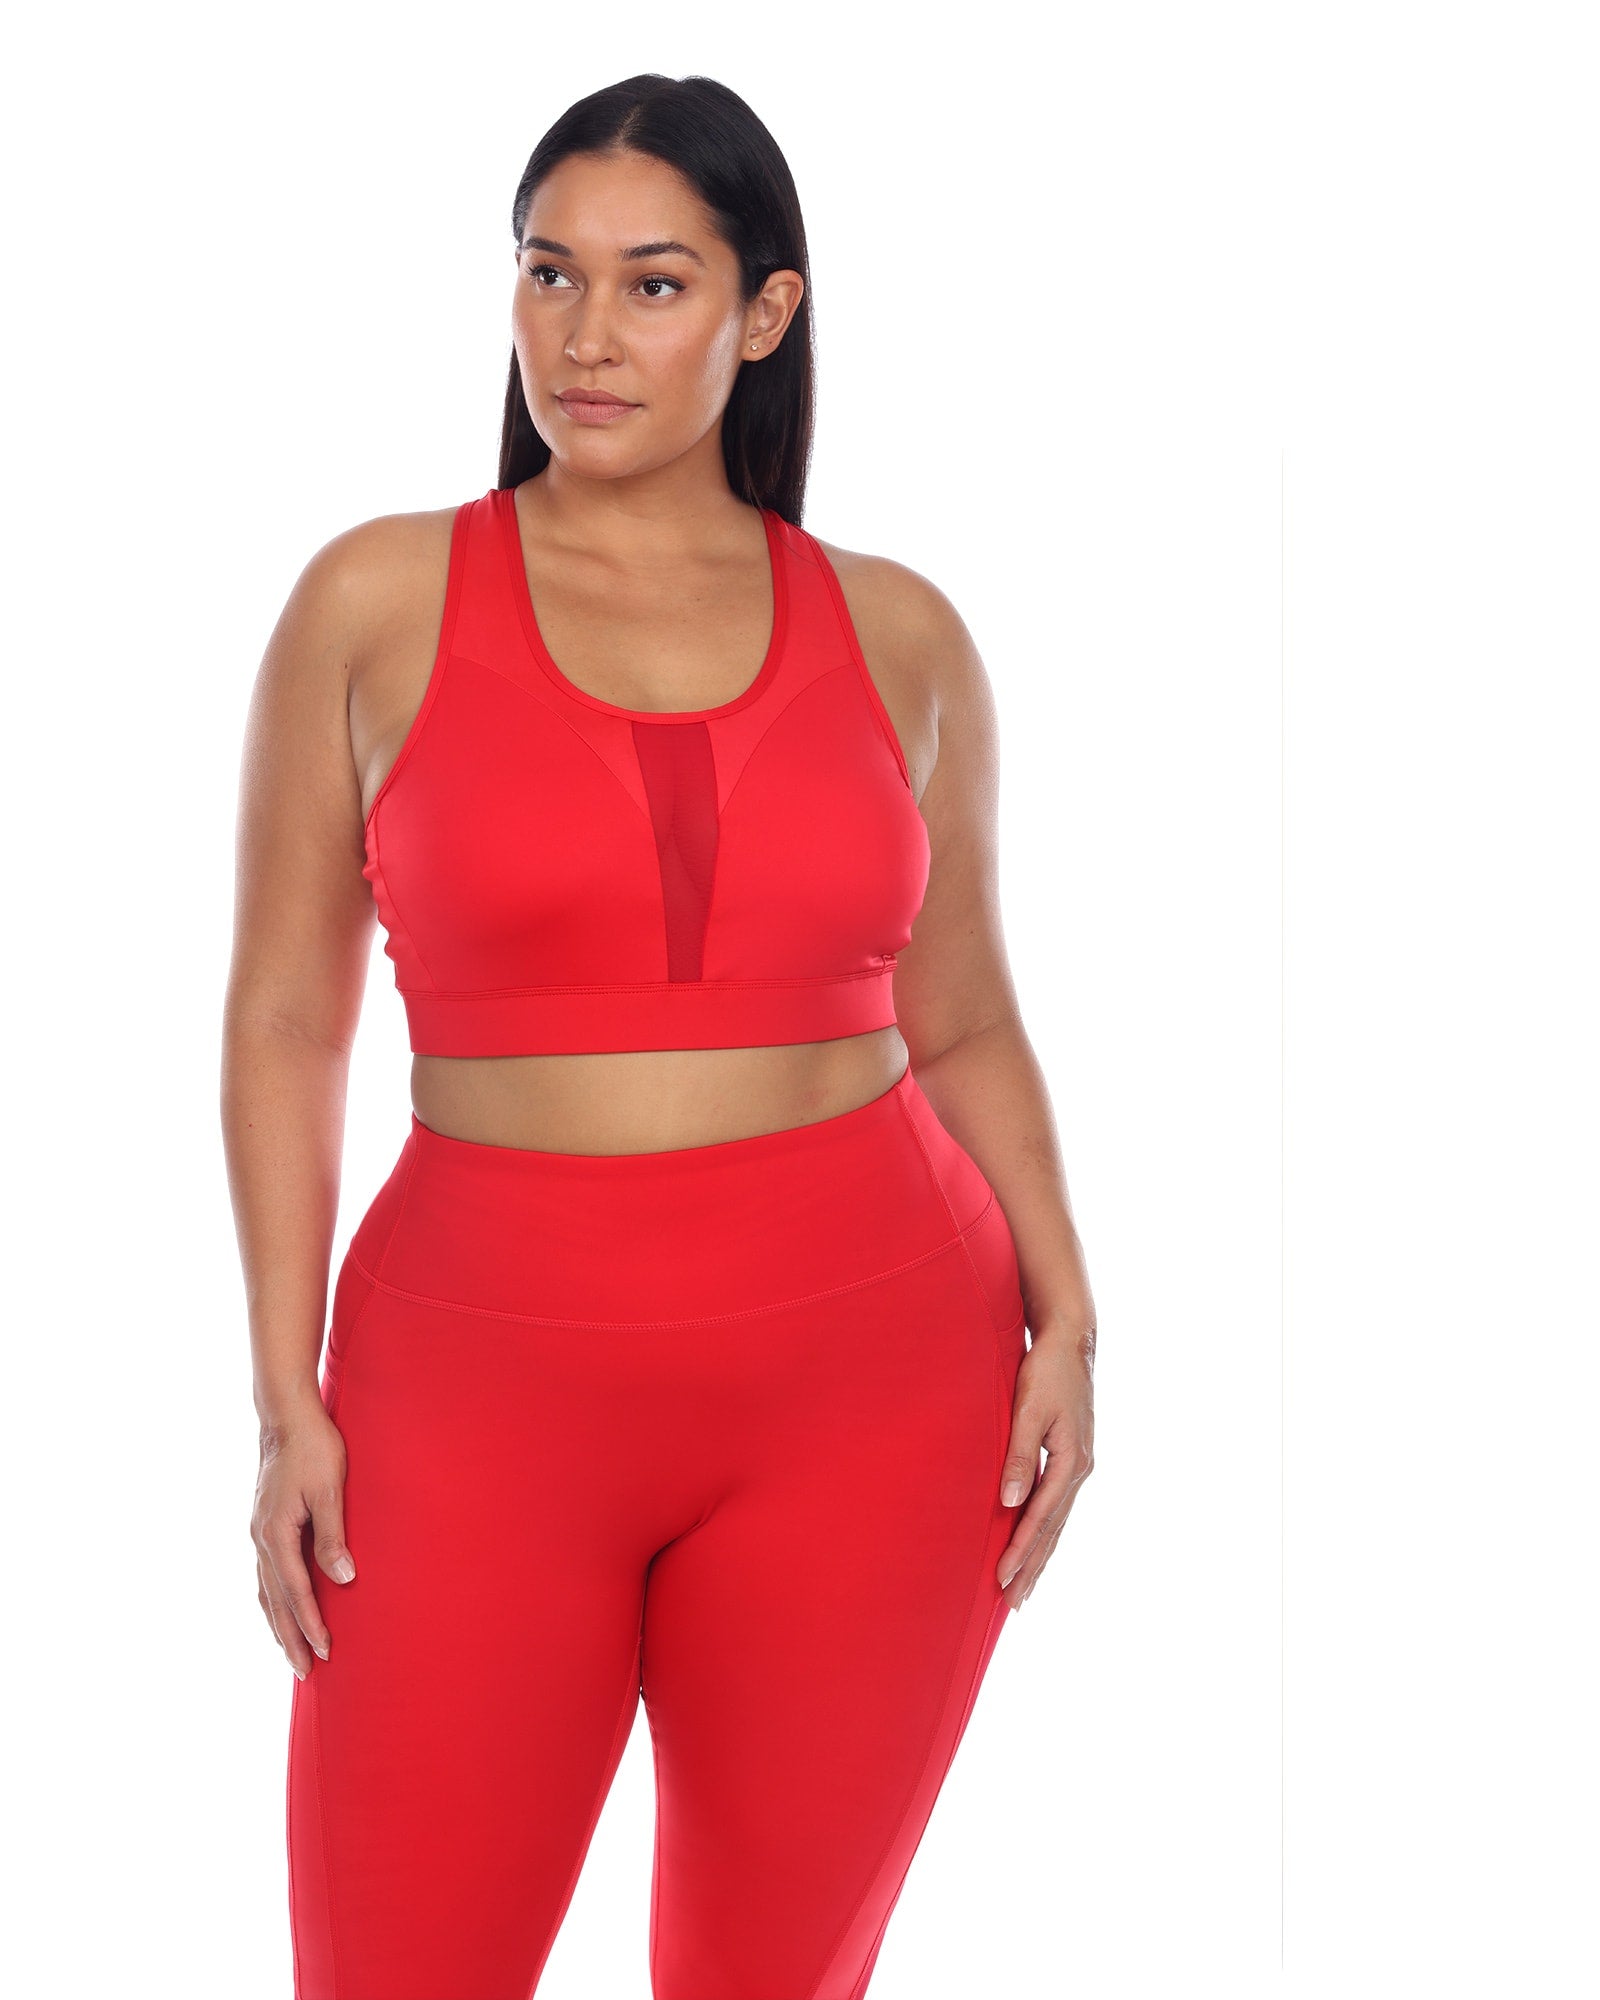 Zyia Active Red Red Bomber Bra Sports bra Size XXL - $28 - From Ashley